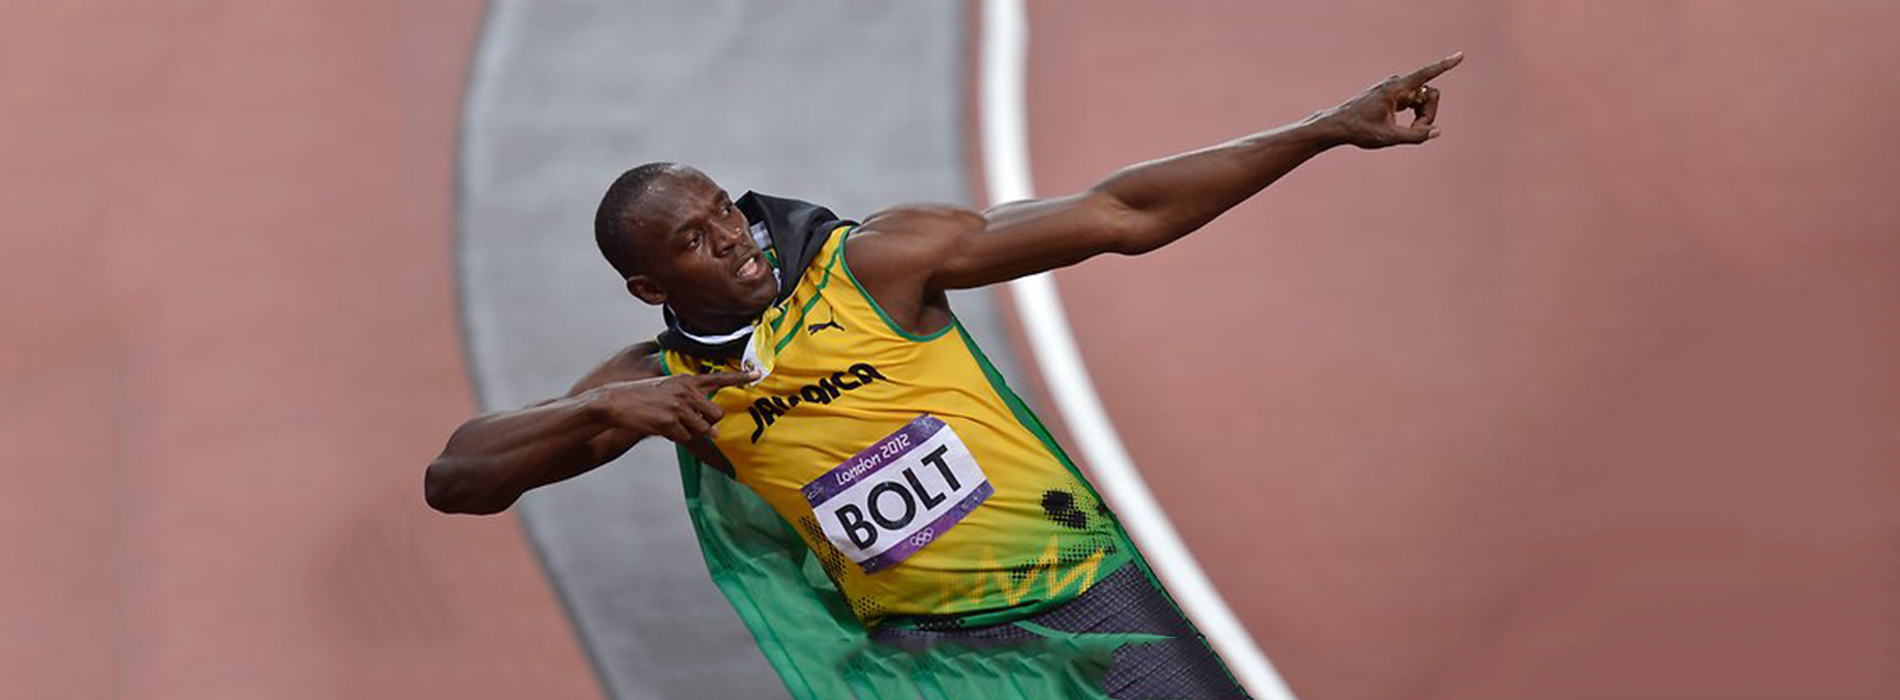 5 Things Your Marketing Can Learn From Usain Bolt